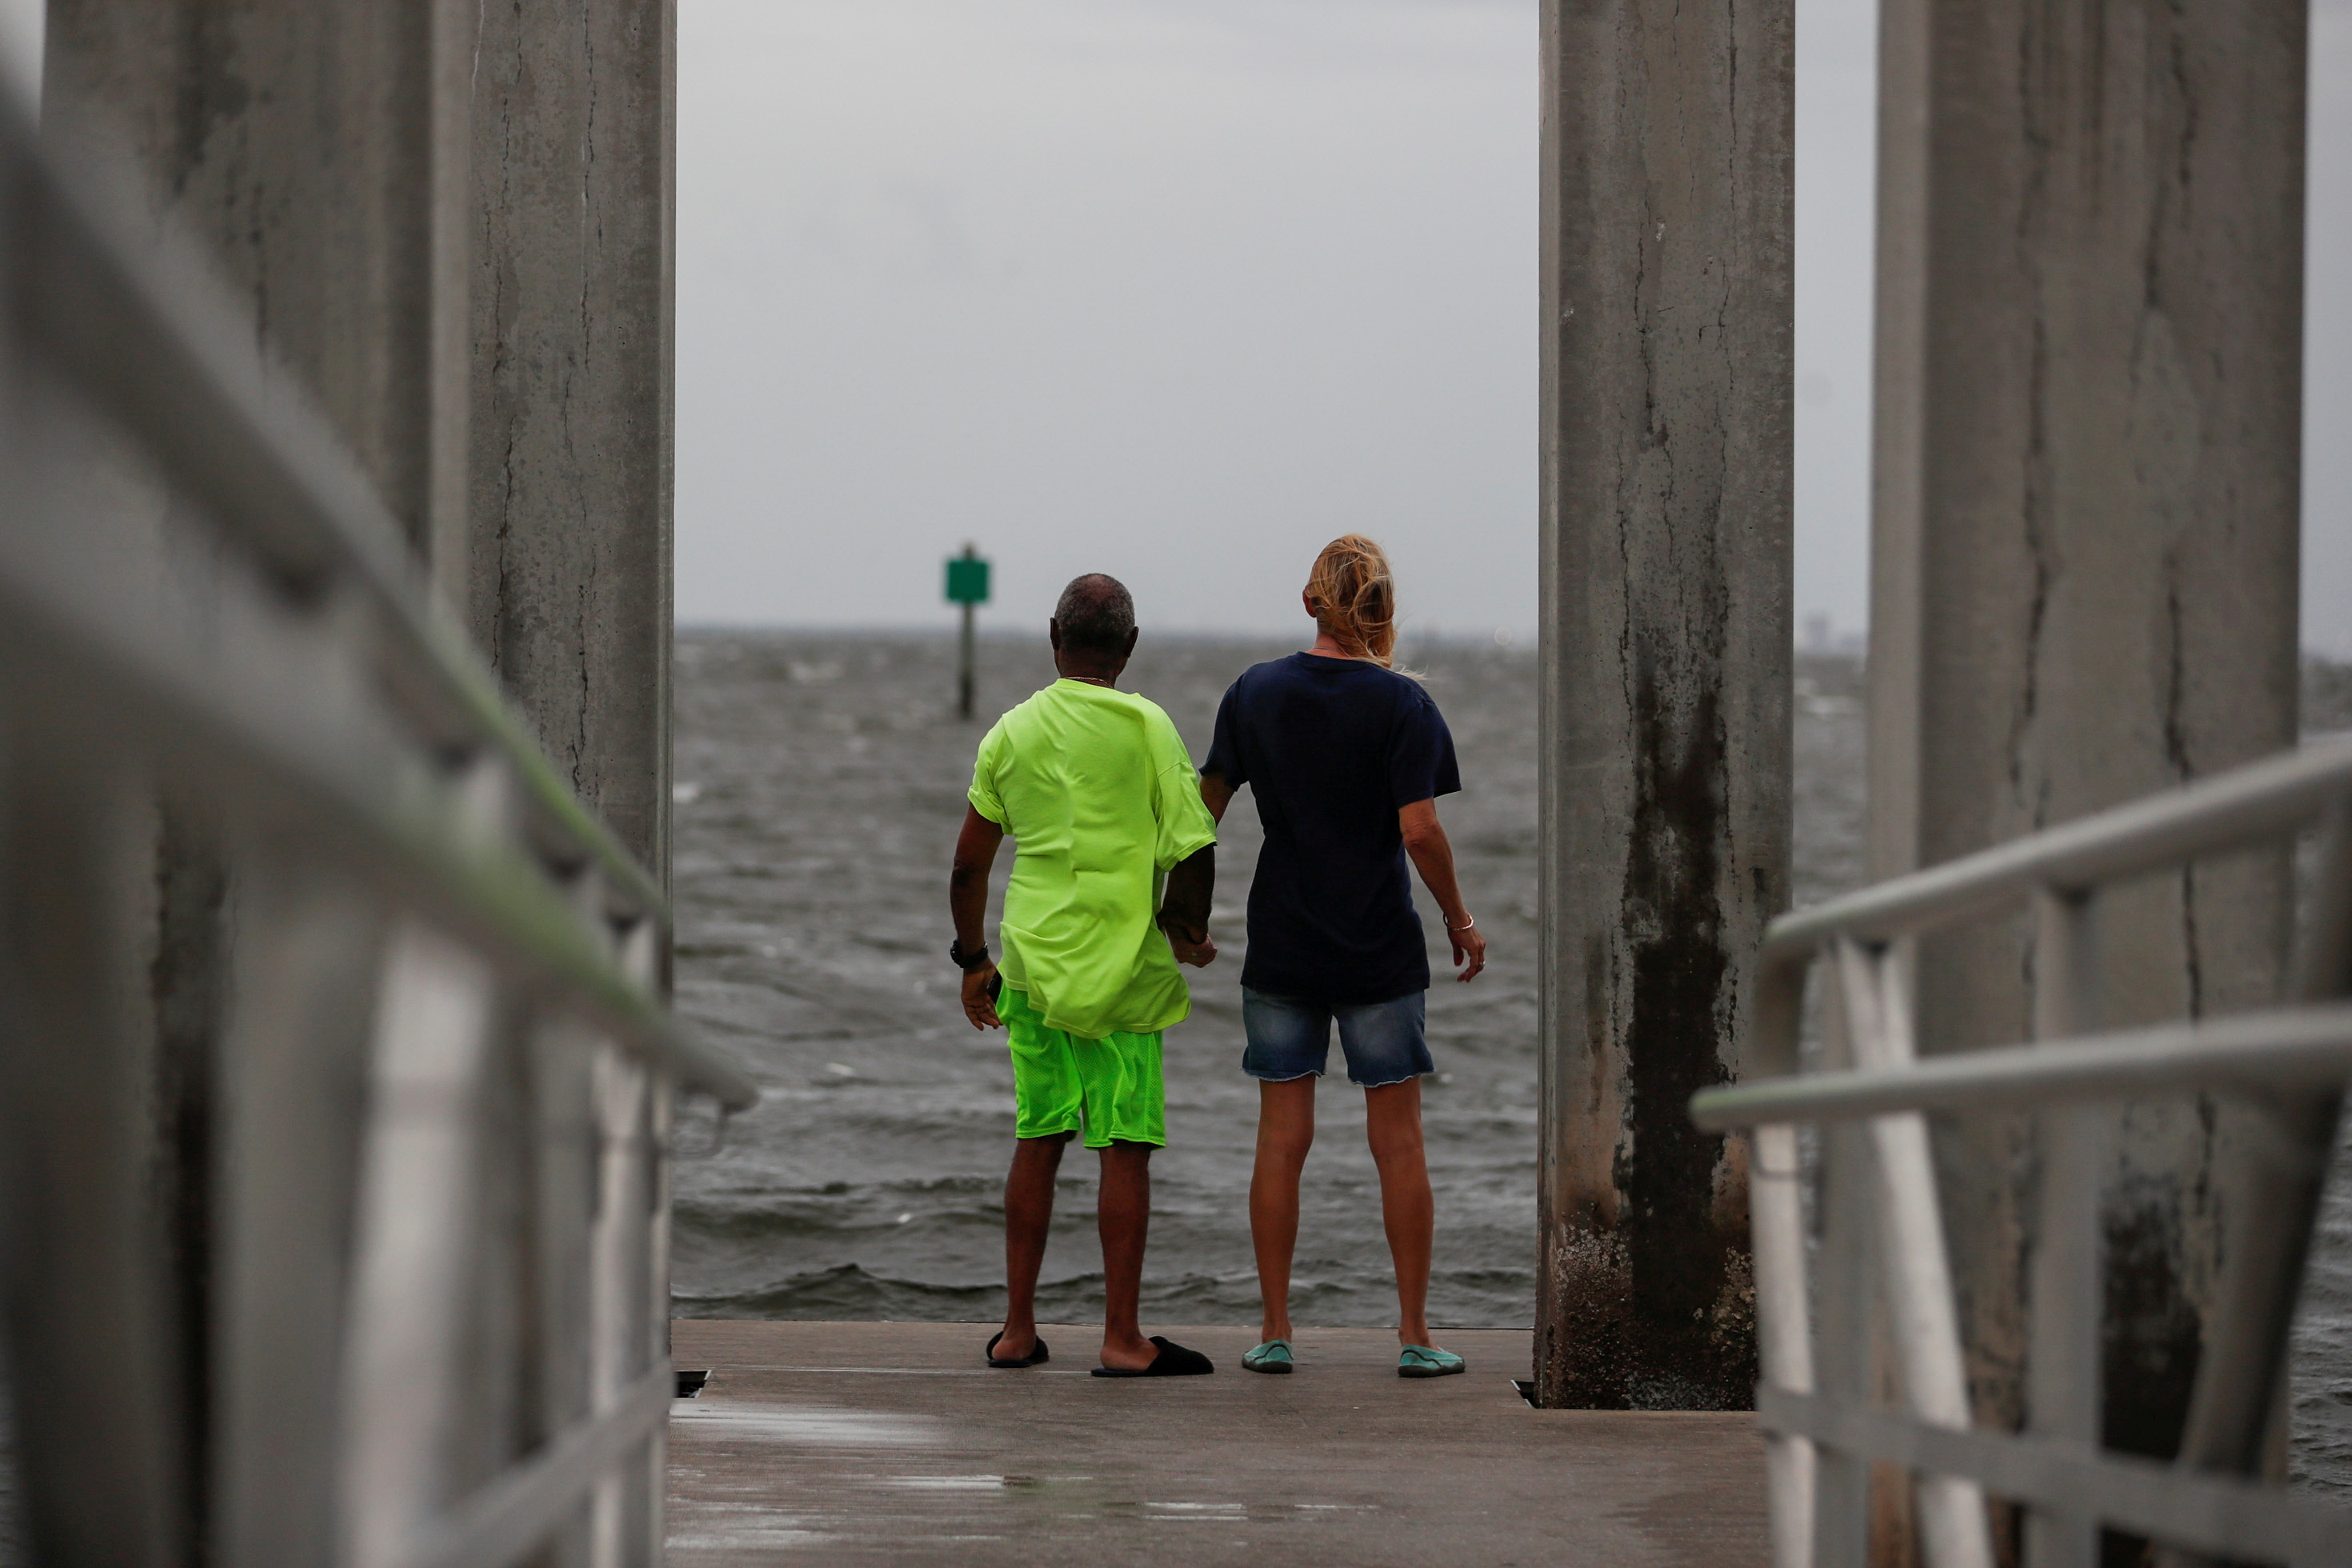 Way Williams, 65, and his wife Jennifer, 60, stand holding hands at Bay Vista Park, as Elsa strengthened into a Category 1 hurricane hours before an expected landfall on Florida's northern Gulf Coast, in St. Petersburg, Florida, U.S.  July 6, 2021. REUTERS/Octavio Jones